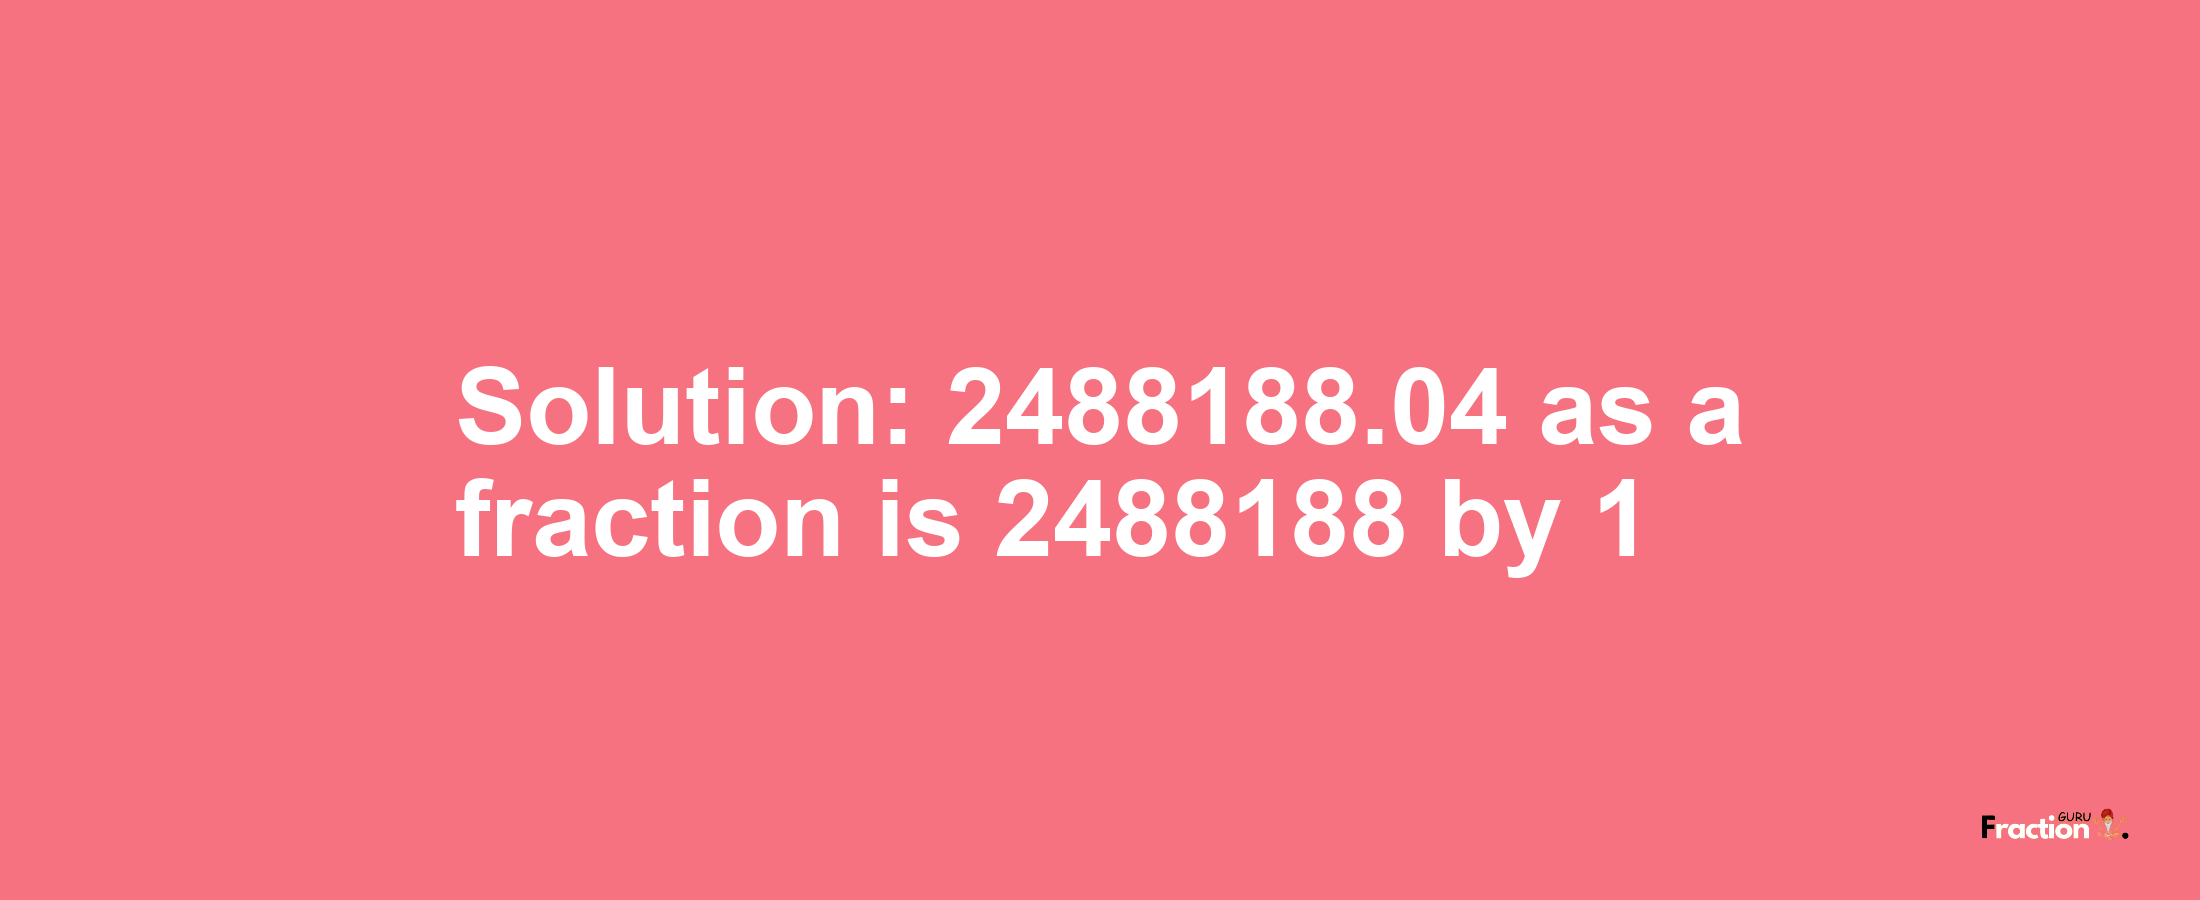 Solution:2488188.04 as a fraction is 2488188/1